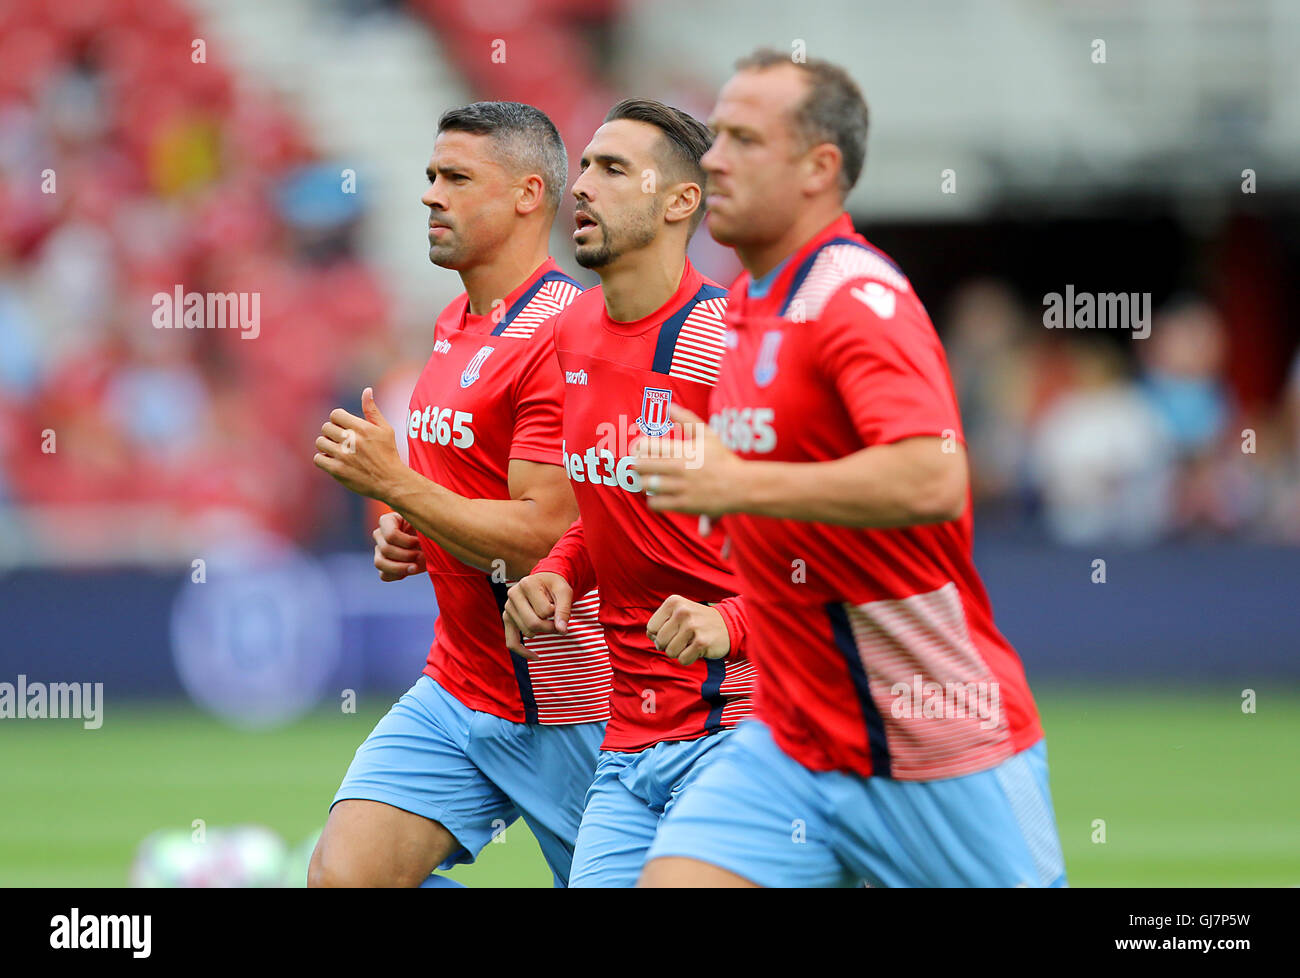 Stoke City's Geoff Cameron (centre) warms up prior to the Premier League match at the Riverside Stadium, Middlesbrough. PRESS ASSOCIATION Photo. Picture date: Saturday August 13, 2016. See PA story SOCCER Middlesbrough. Photo credit should read: Richard Sellers/PA Wire. RESTRICTIONS: EDITORIAL USE ONLY No use with unauthorised audio, video, data, fixture lists, club/league logos or 'live' services. Online in-match use limited to 75 images, no video emulation. No use in betting, games or single club/league/player publications.- Se Stock Photo